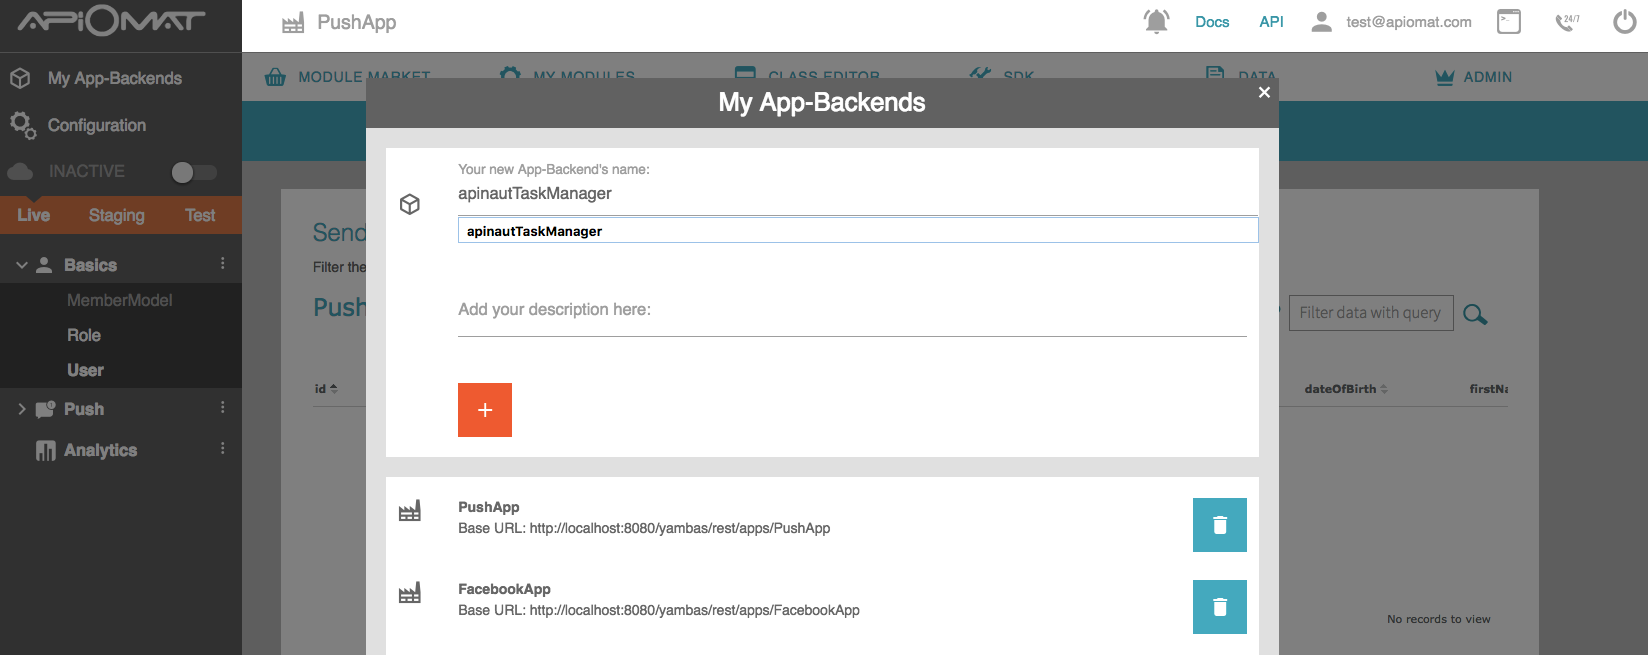 images/download/attachments/61478827/taskManager_newBackend.png